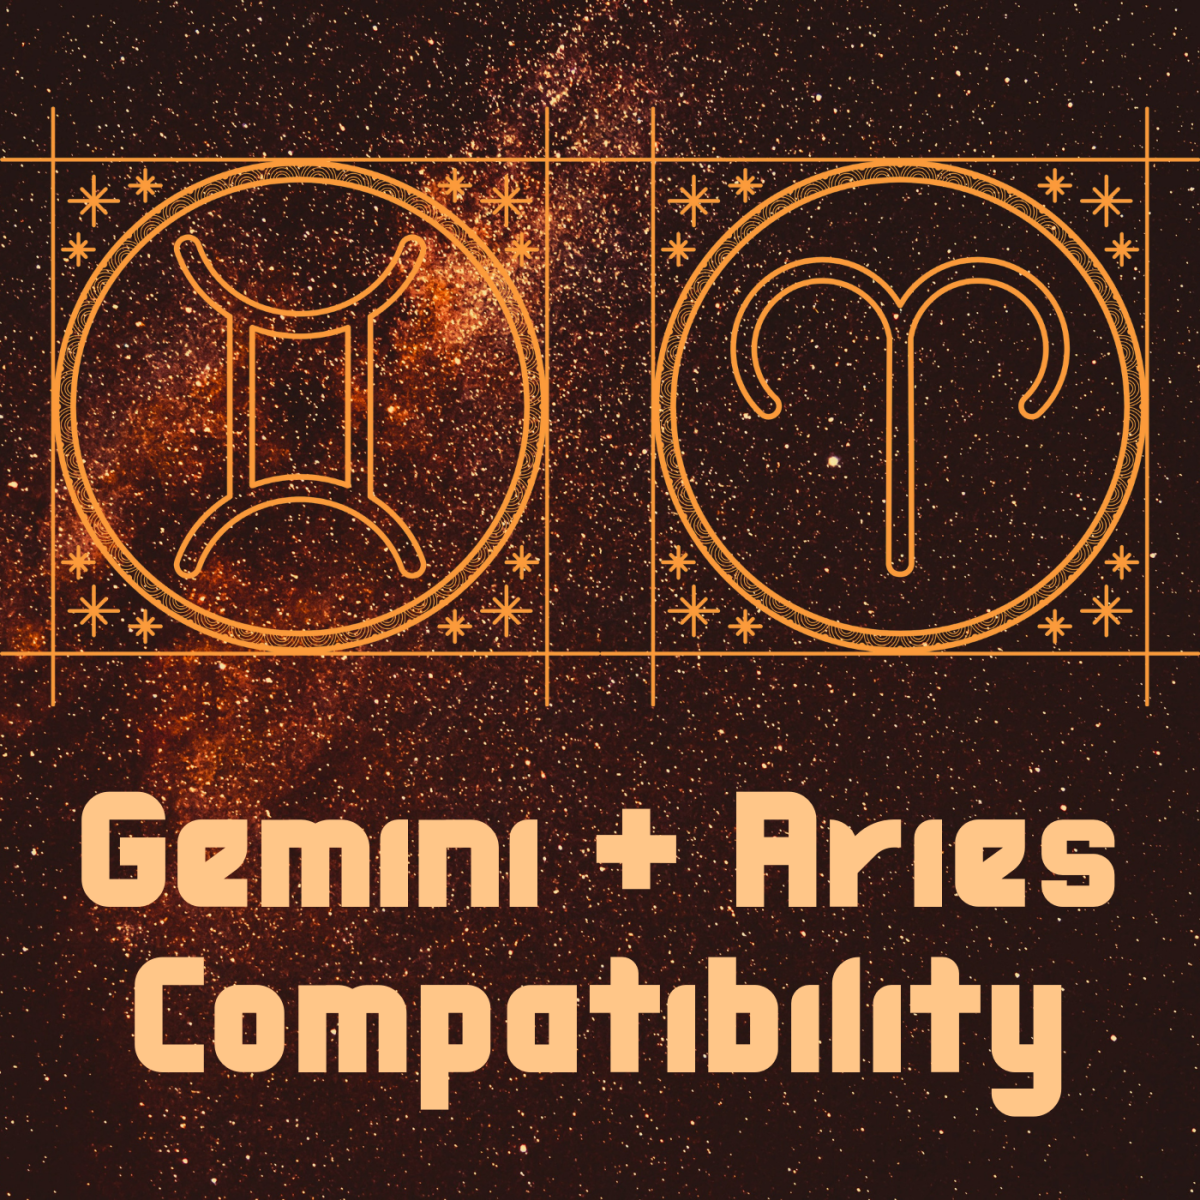 Discover if Aries and Gemini are a good match.